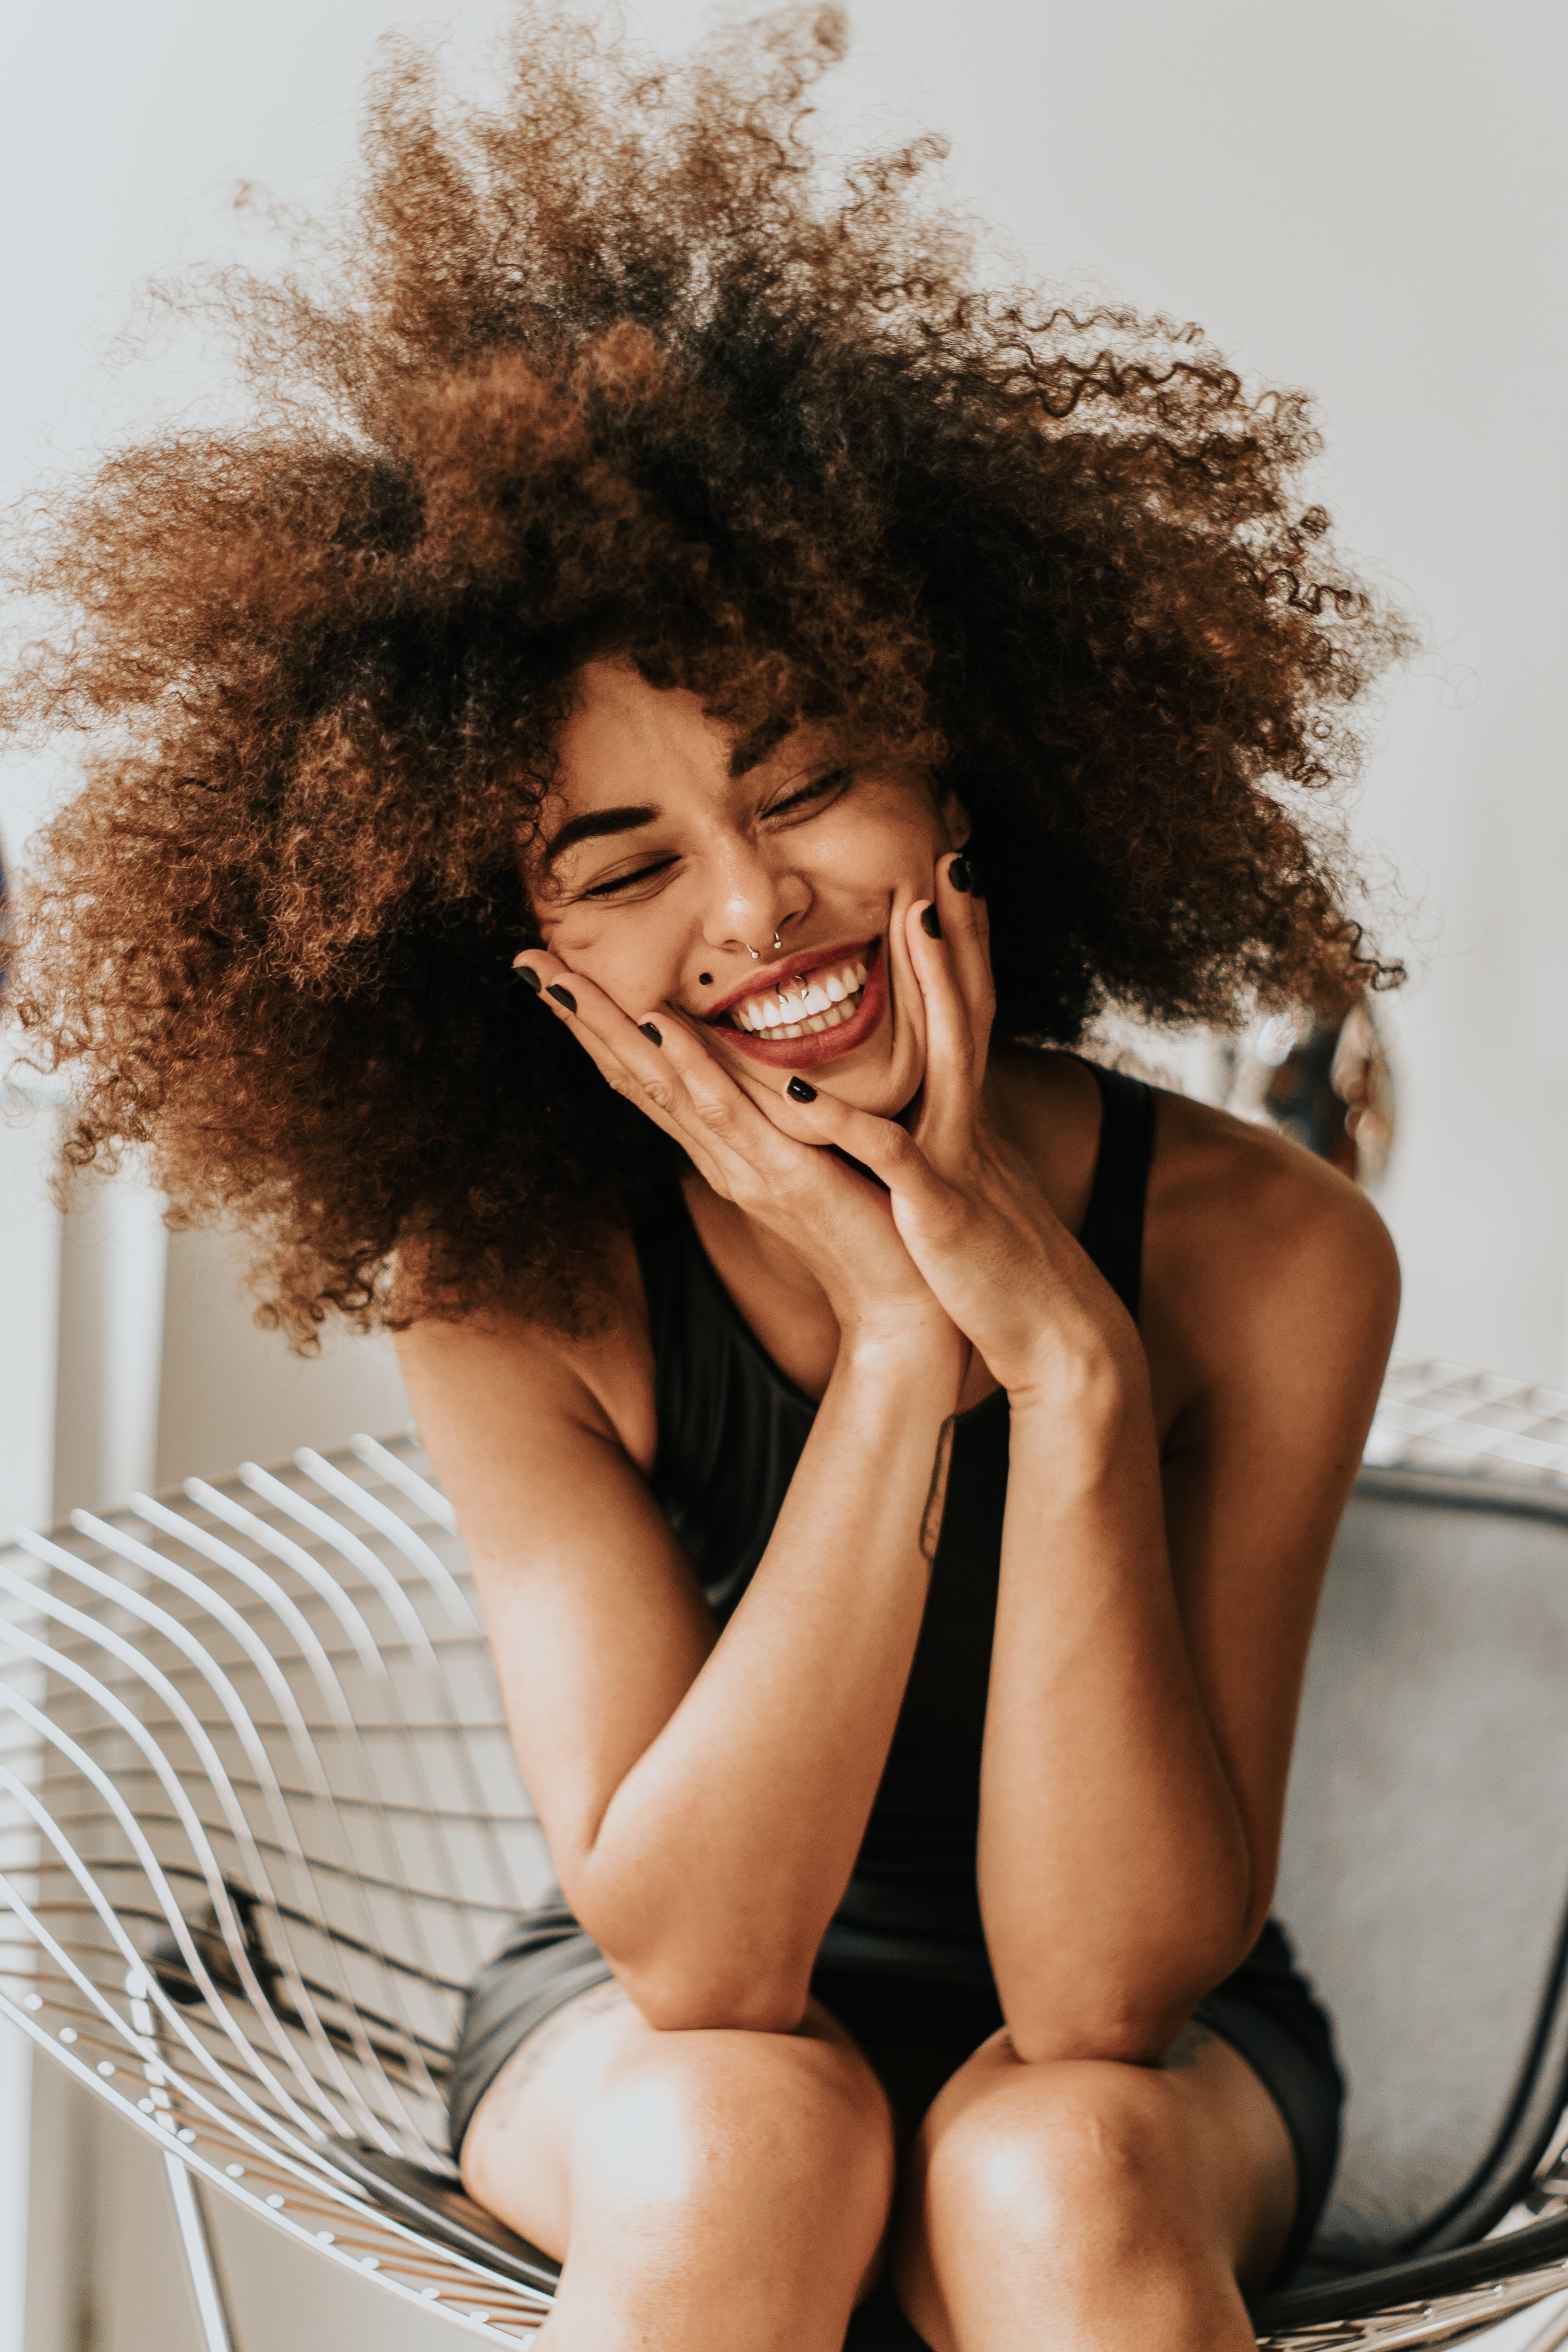 A lady smiling. | Source: Pexels